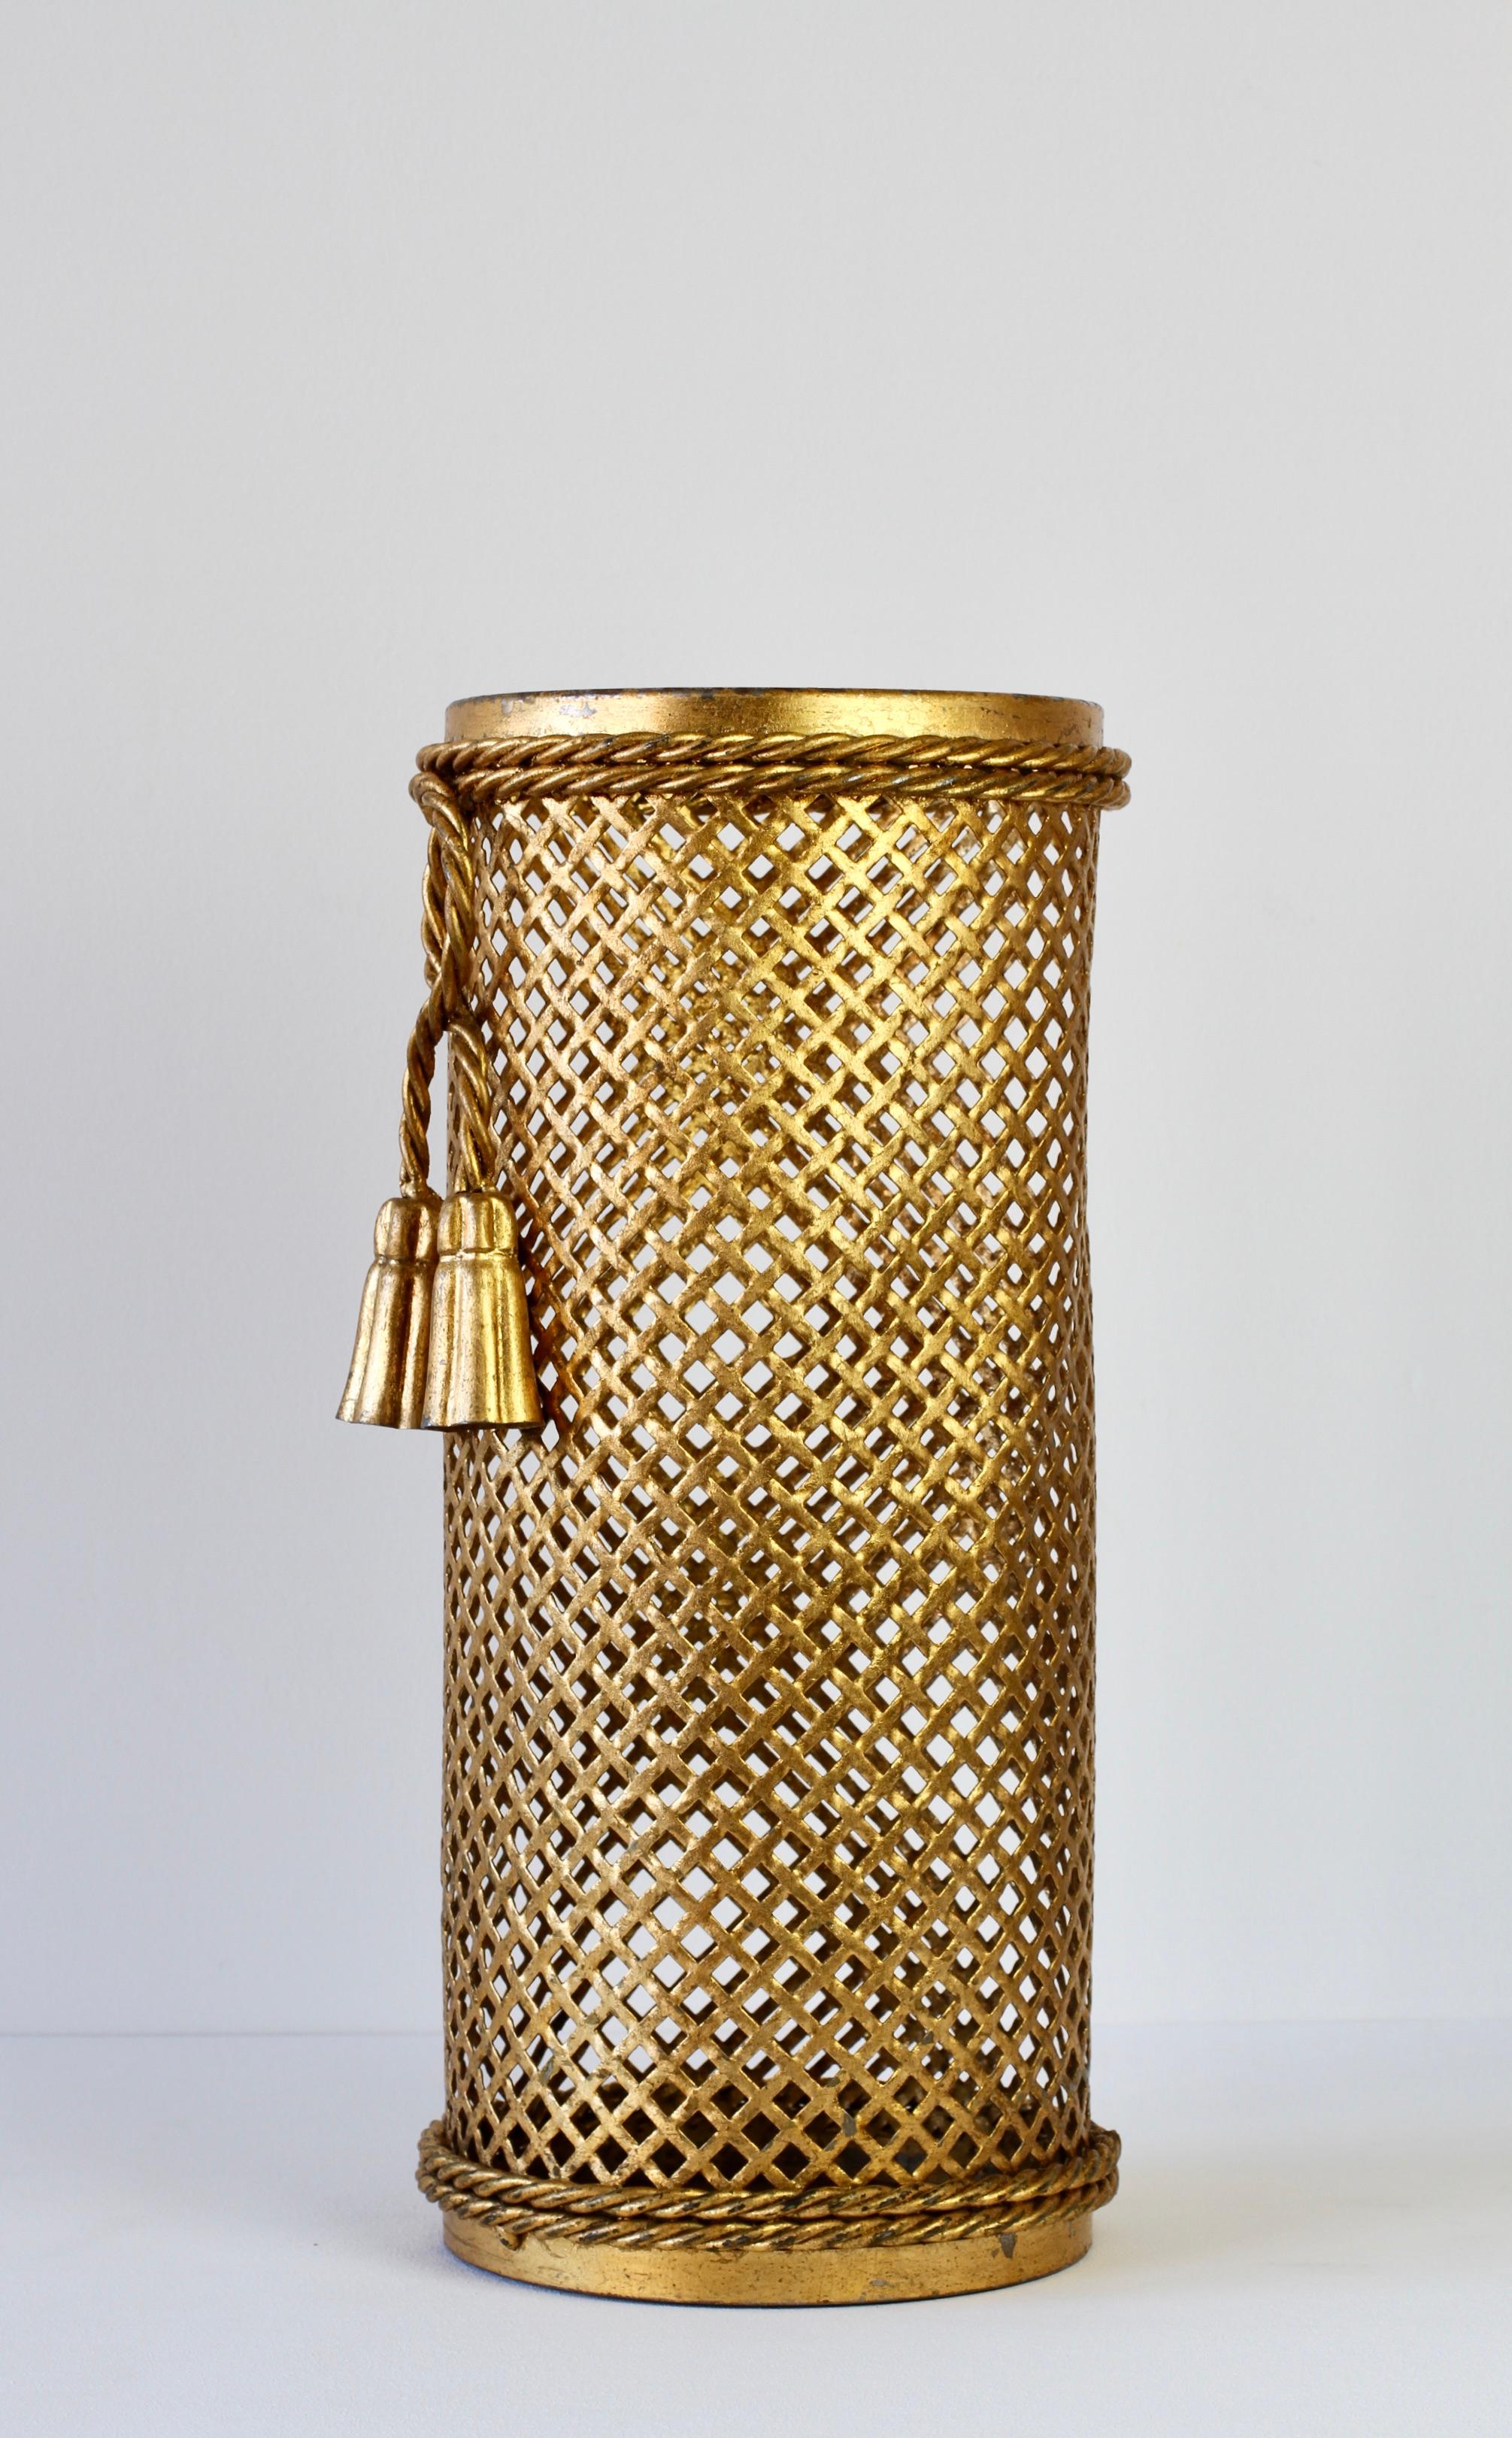 Stunning midcentury gold / gilt / gilded Hollywood Regency style umbrella stand / holder made in Florence, Italy, circa 1950 attributed to Li Puma Firenze. The perforated lattice patterned metalwork with bent rope and tassel details finishes the